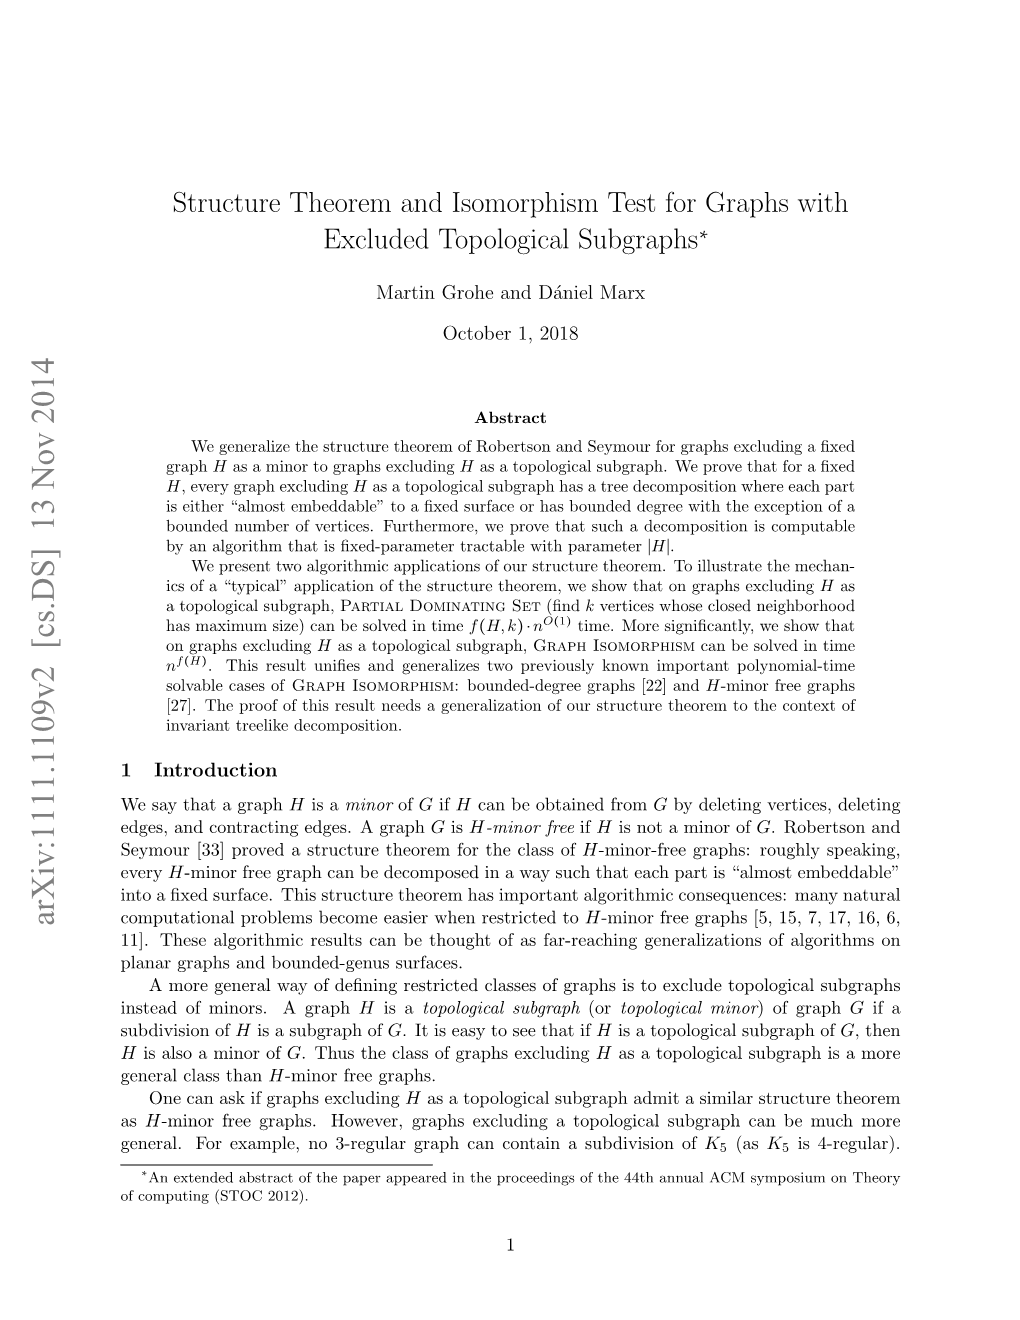 Structure Theorem and Isomorphism Test for Graphs with Excluded Topological Subgraphs∗